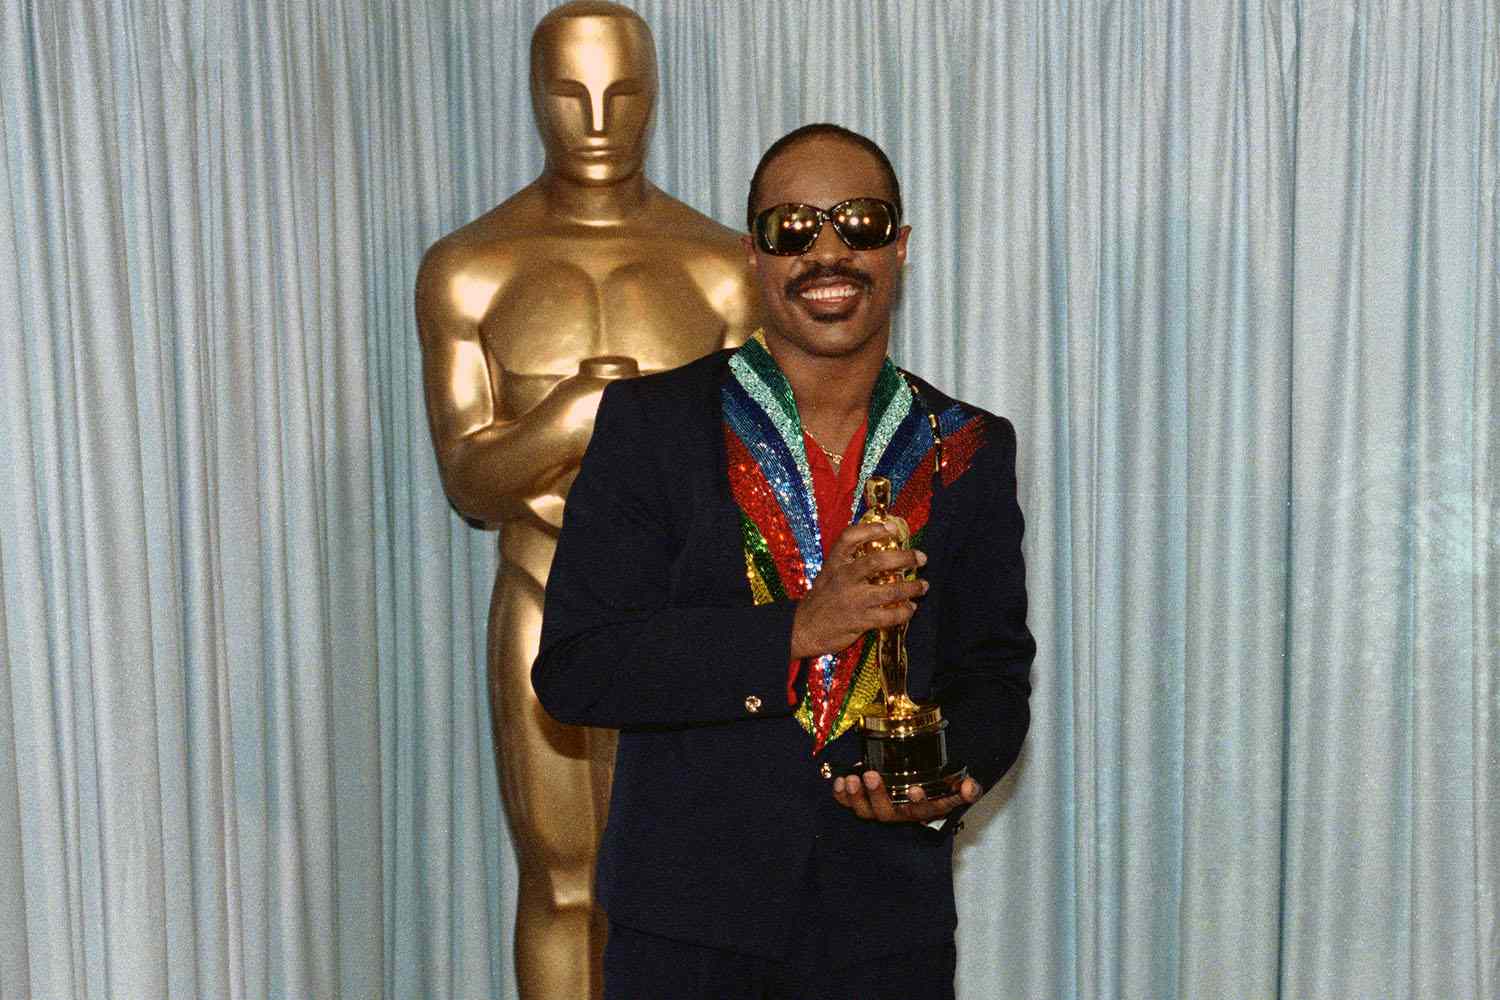 Stevie Wonder who began learning the piano at the age of seven holds his Oscar award for the category of Best Song.